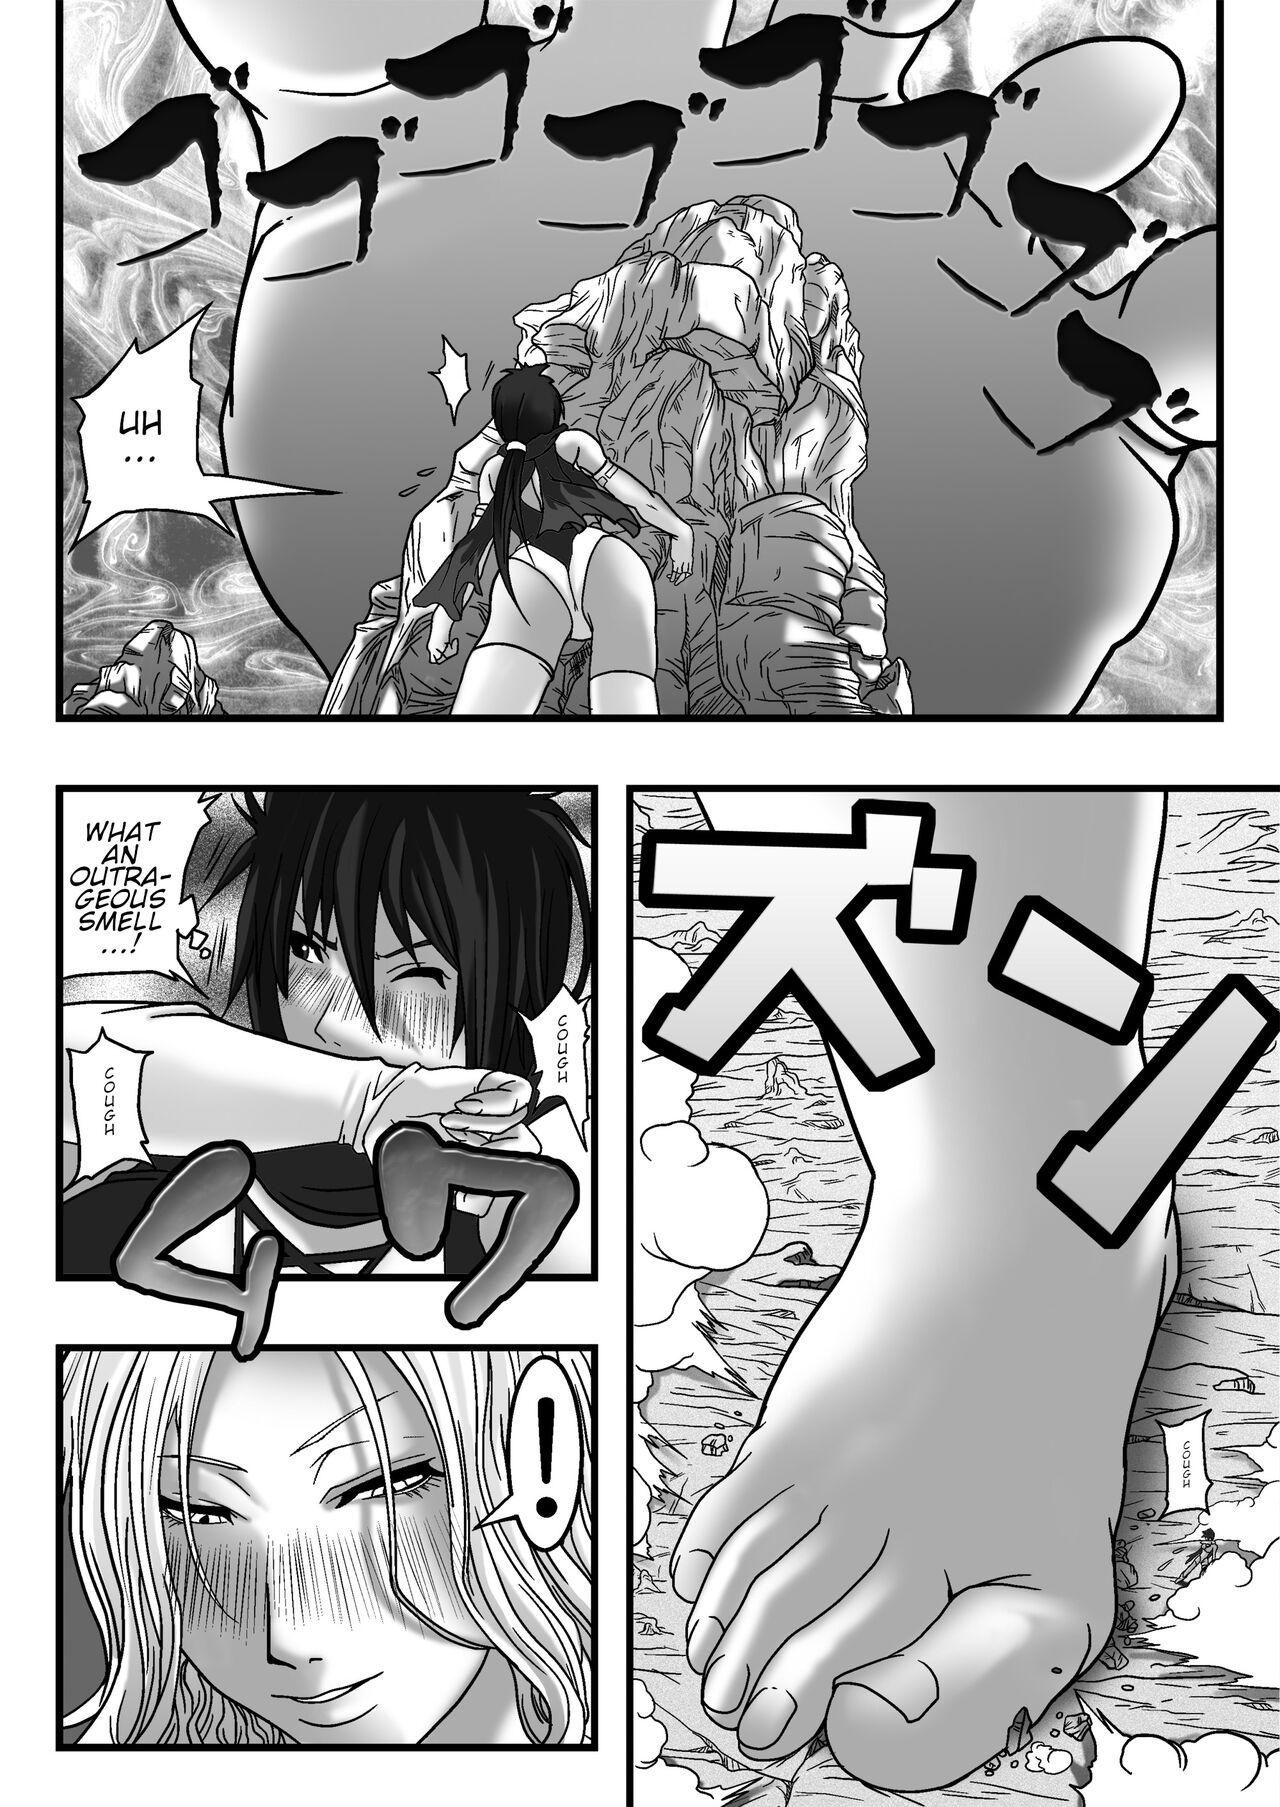 Sola Size Fetish Comic Vol.3 - Original Foreplay - Page 11